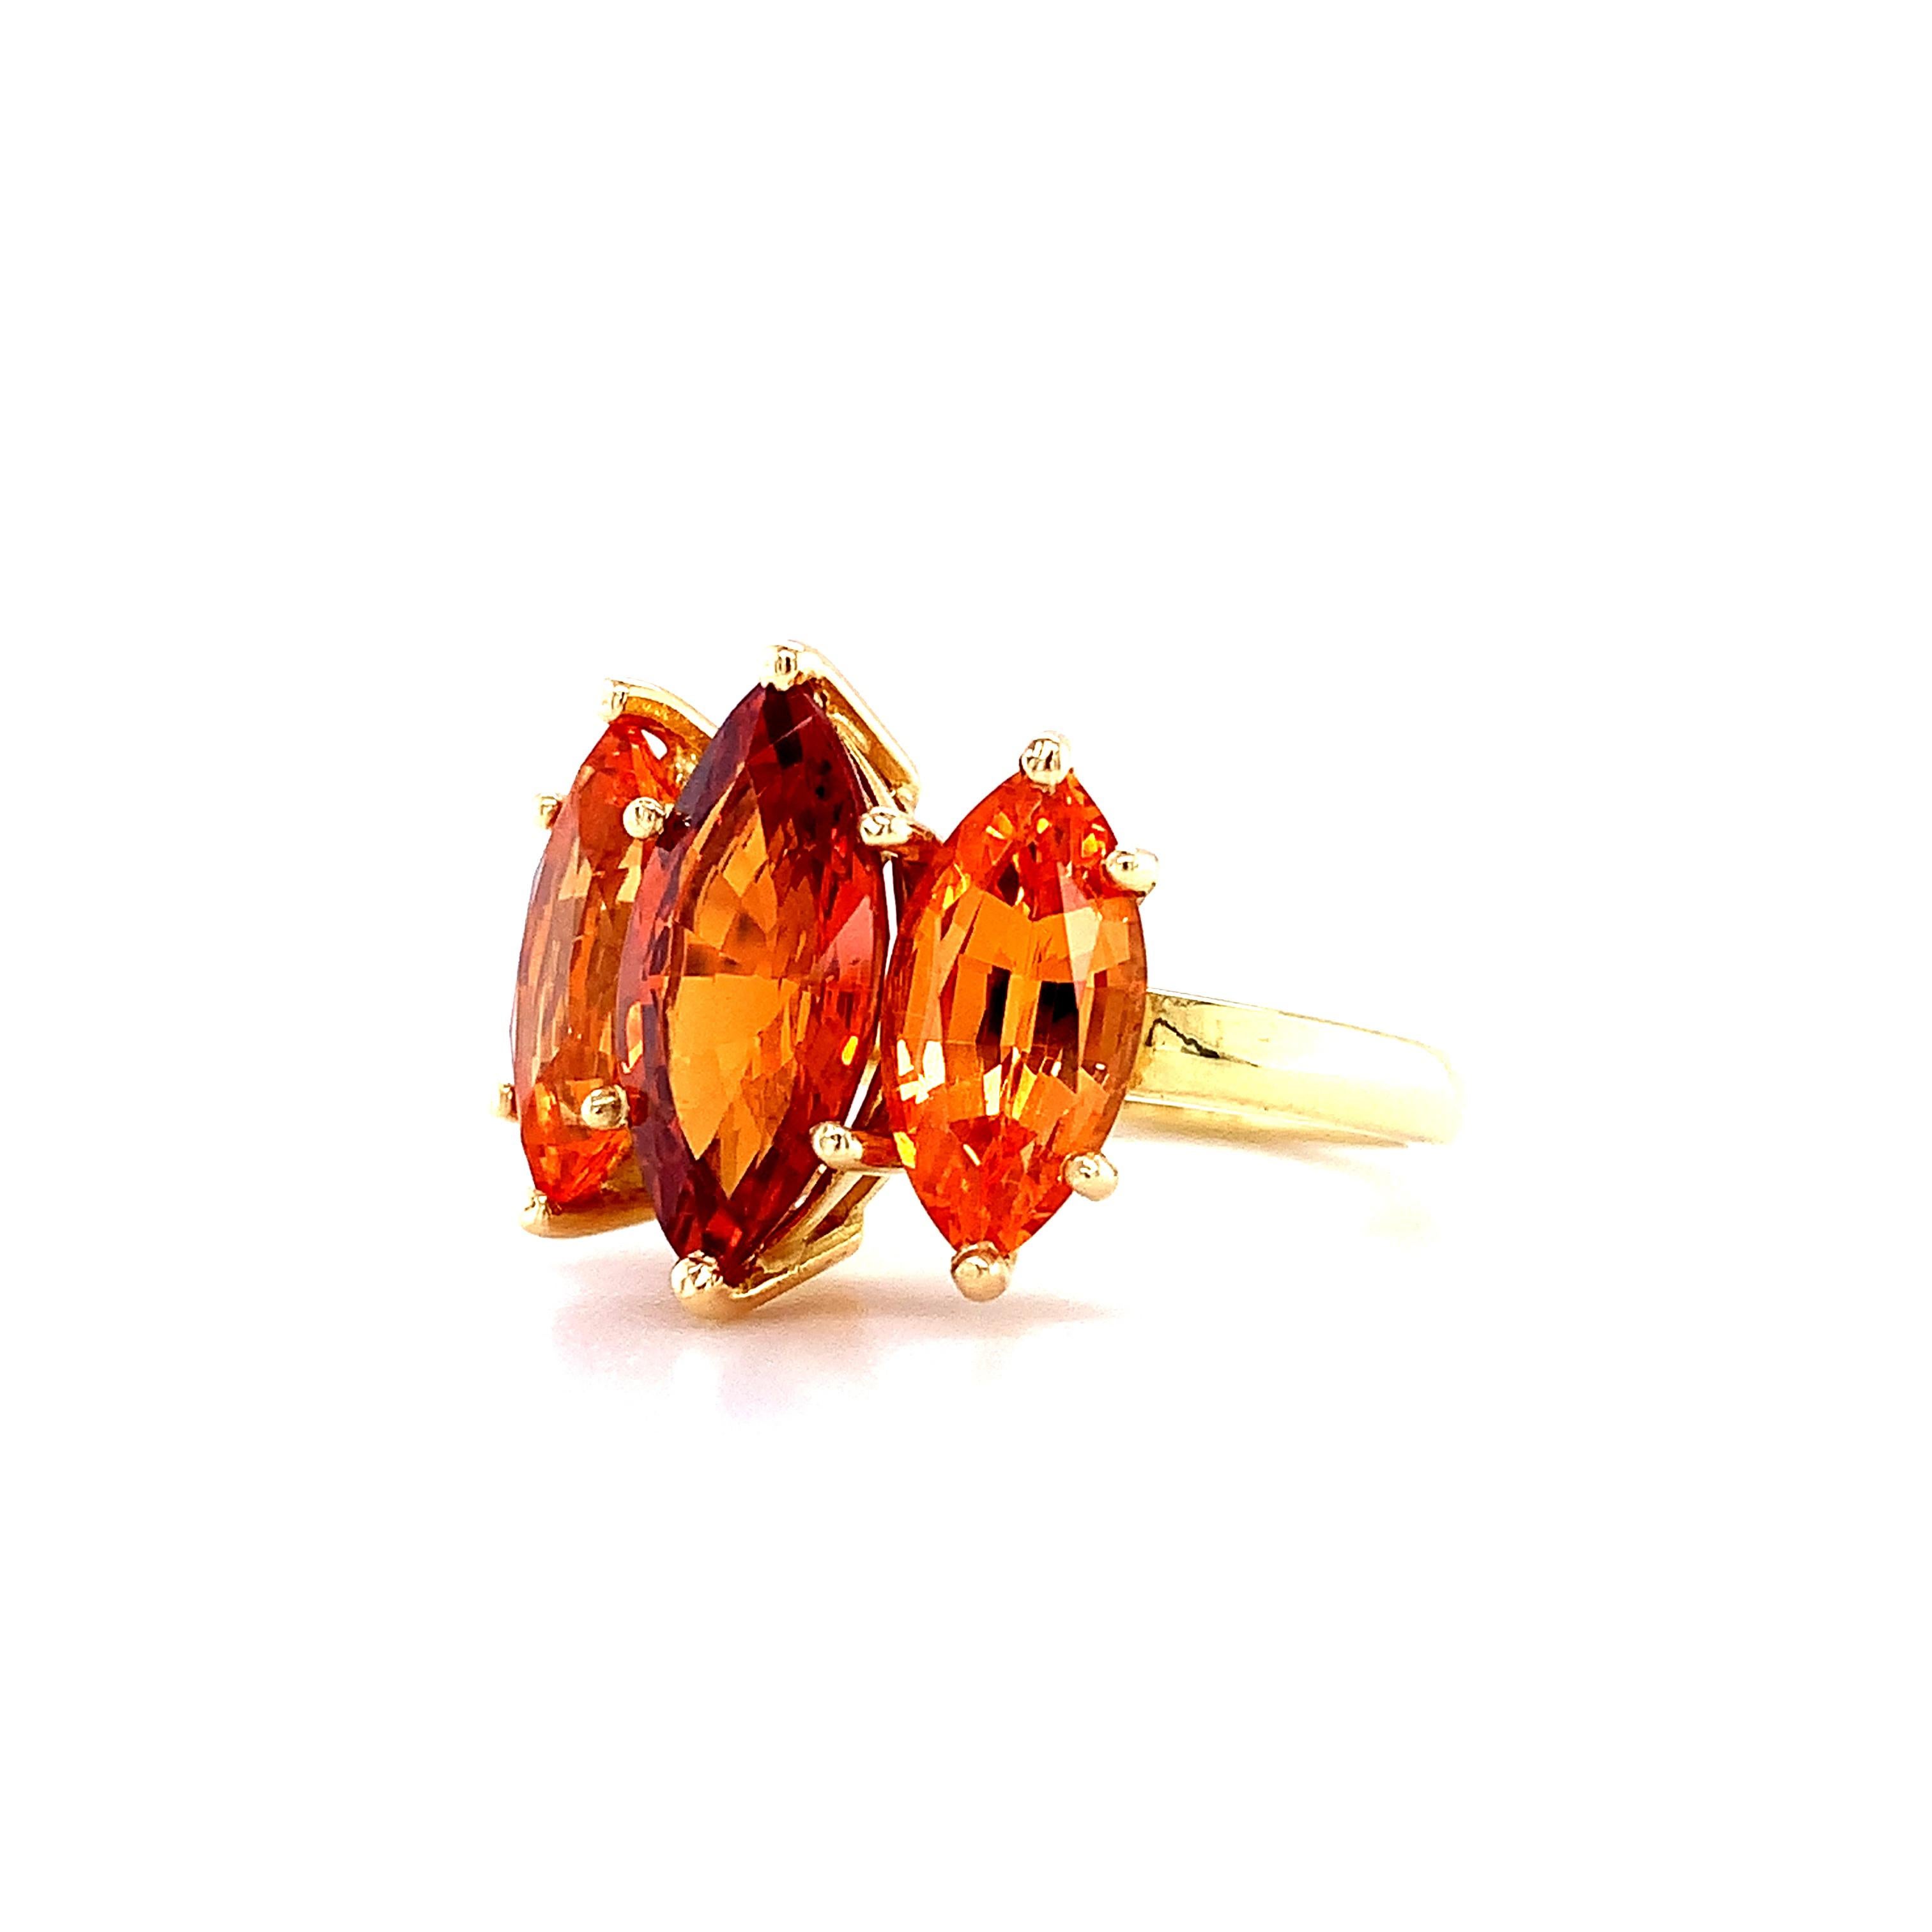 For the connoisseur of color! An unusual, richly colored hessonite garnet marquise is set with a pair of fine quality spessartite garnets in this not-so-classic, three-stone cocktail ring The 3.39 carat hessonite center stone has a strikingly